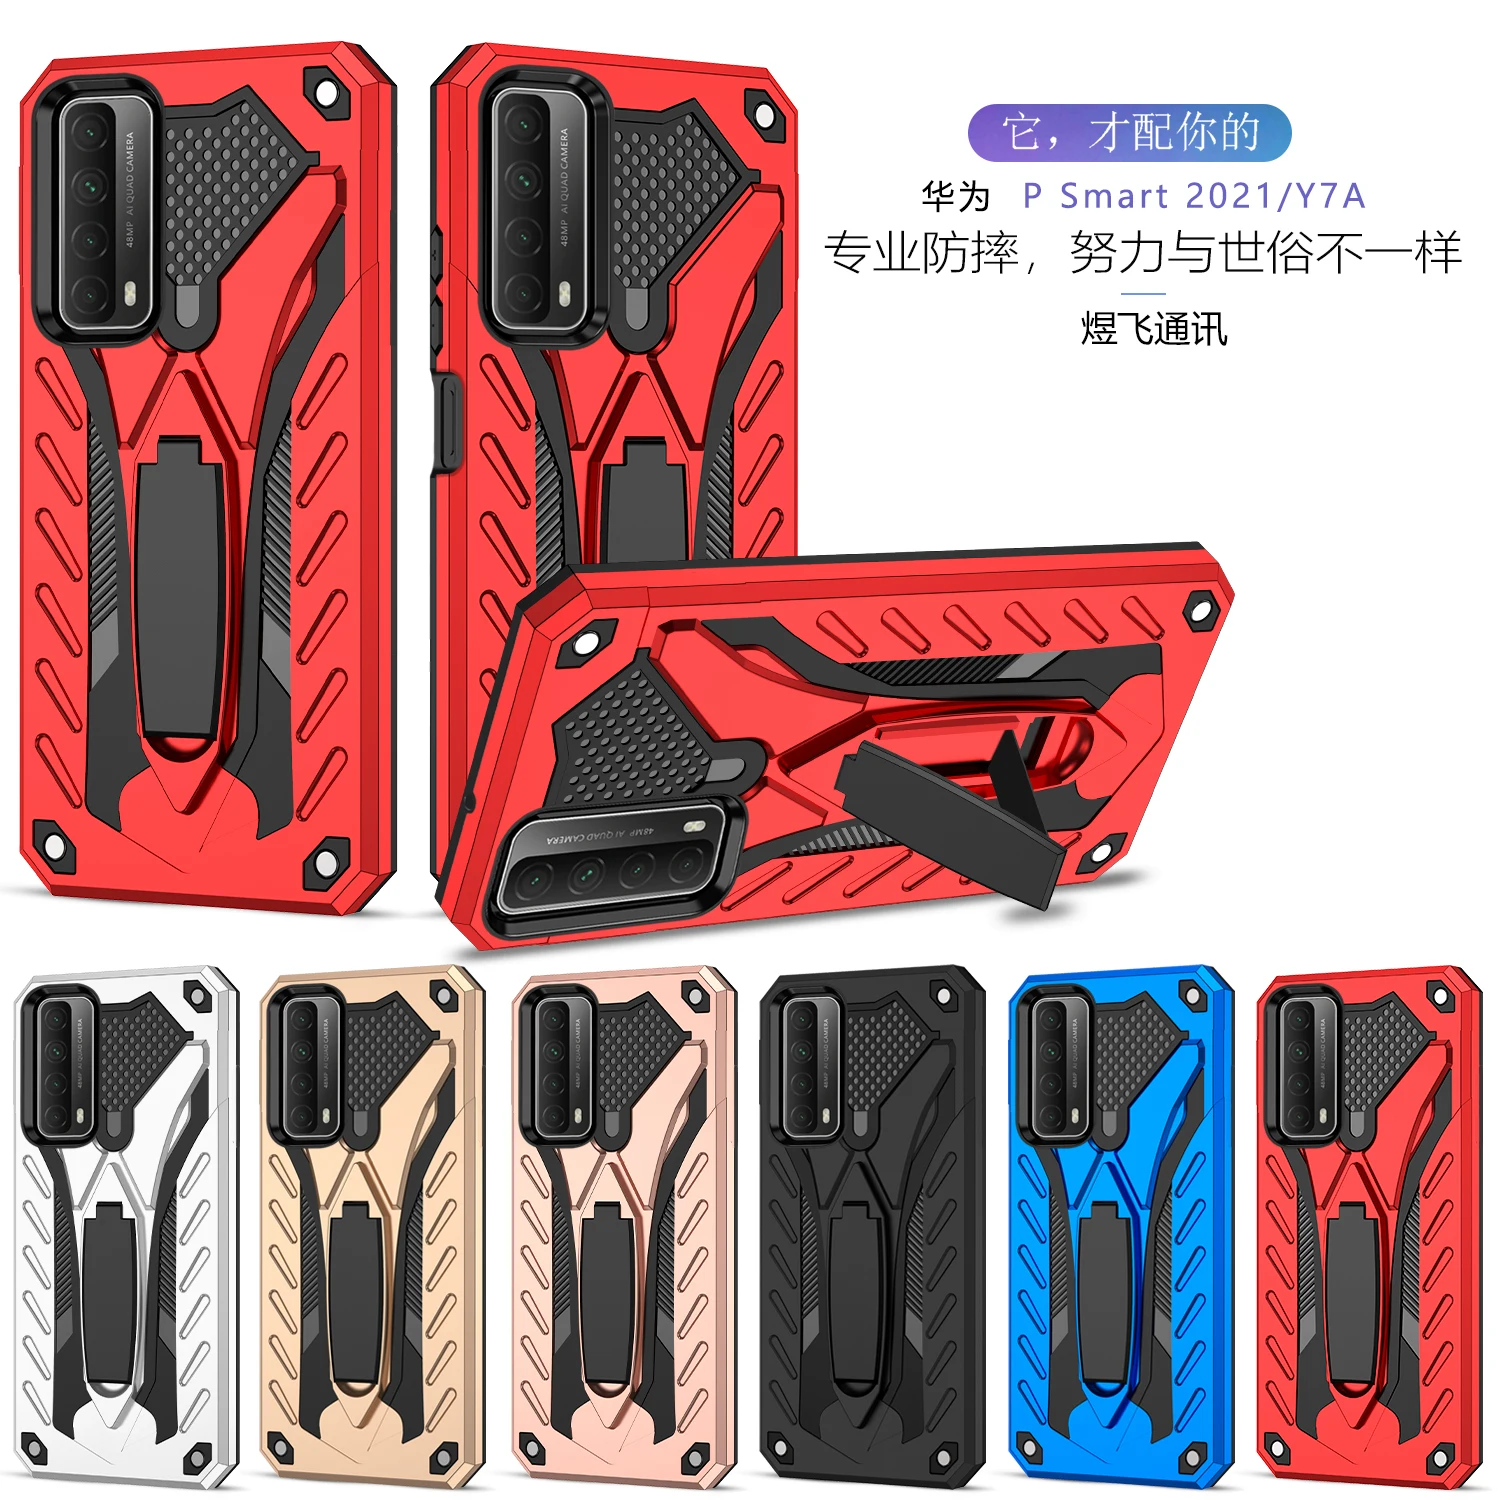 

Luxury Armor Shockproof Stand Case For Huawei P40 P30 P20 P9 P10 P8 Lite E P Smart S Z nova 7i 6 SE 5 4 E 3i Pro Lite Plus Cover